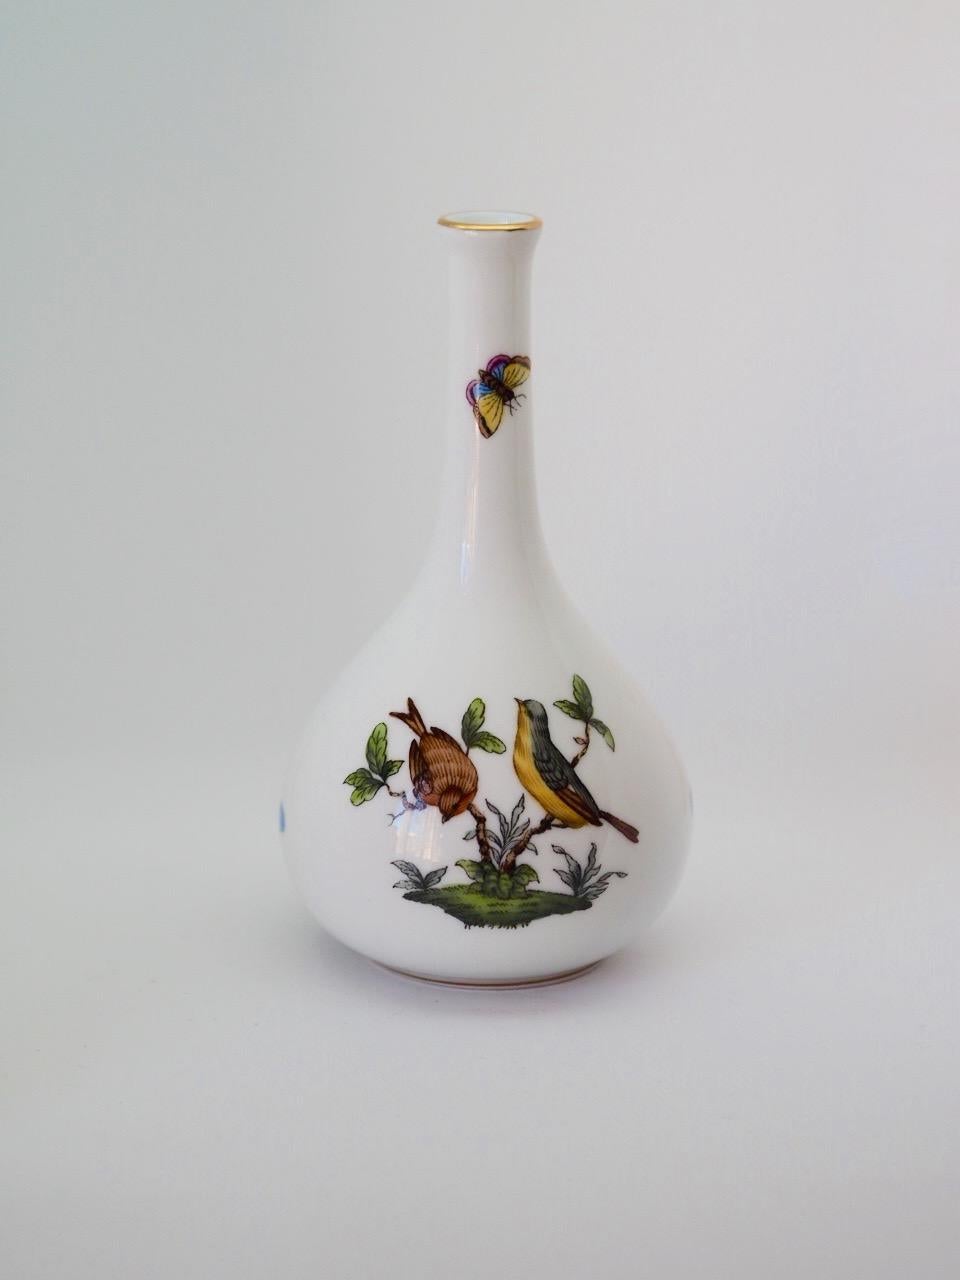 Beautiful filigree hand painted Herend bud vase.
Decorative Rotschild pattern. Two little birds, bugs and butterflies with floral motives.

